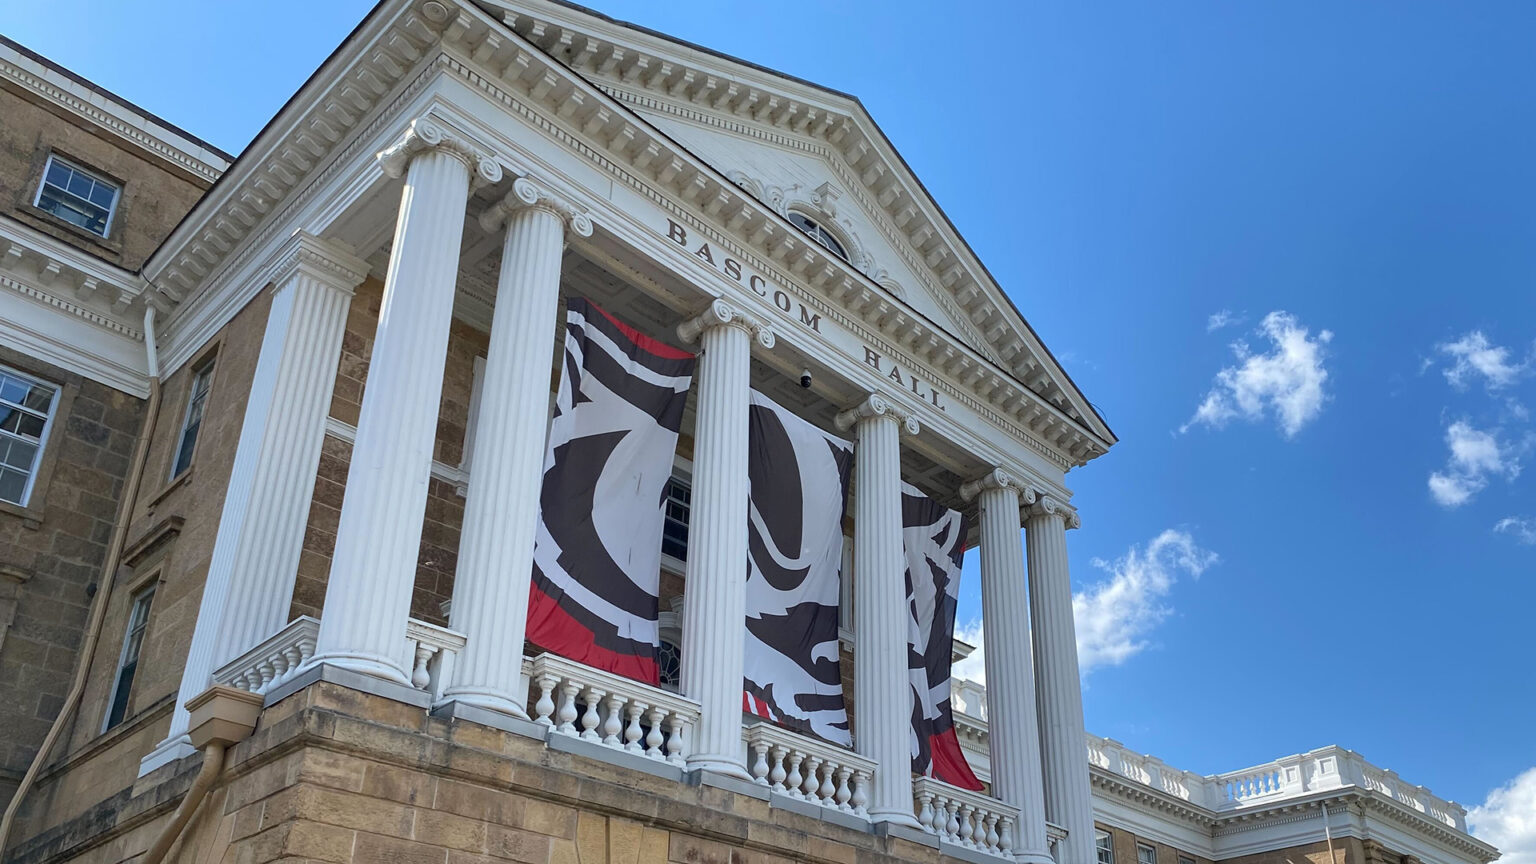 A trio of banners depicting Bucky Badger are placed between pillars on the facade of Bascom Hall on the UW-Madison campus, with a blue sky with a few clouds in the background.